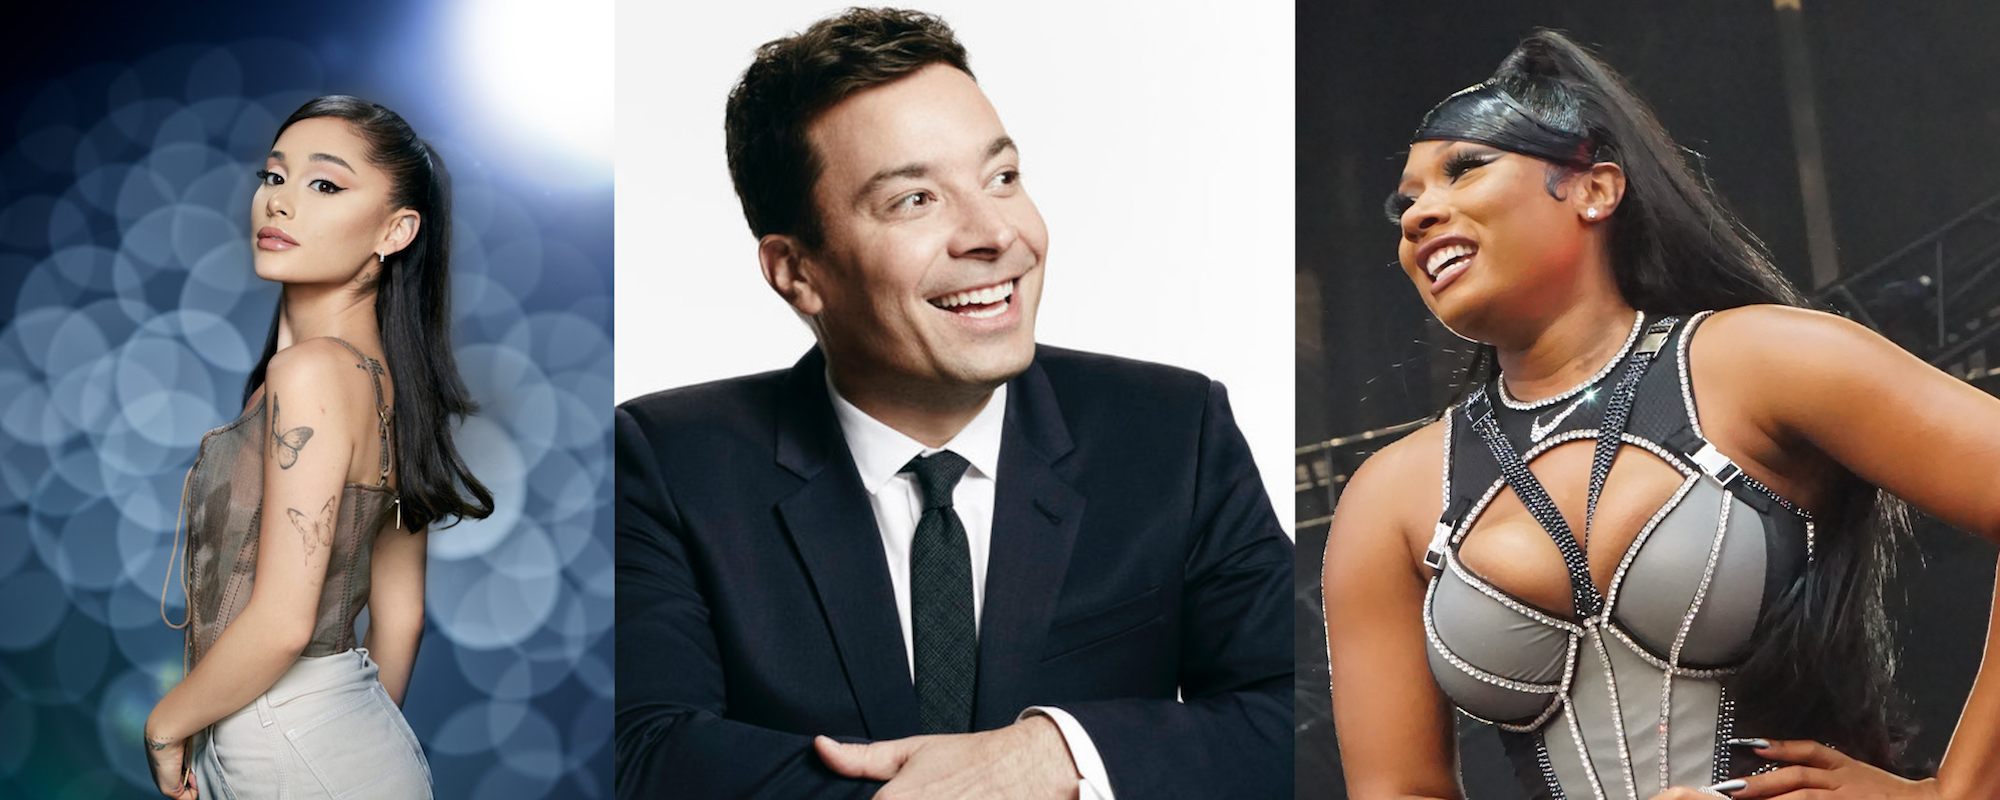 Jimmy Fallon Drops Song, Video with Ariana Grande and Megan Thee Stallion